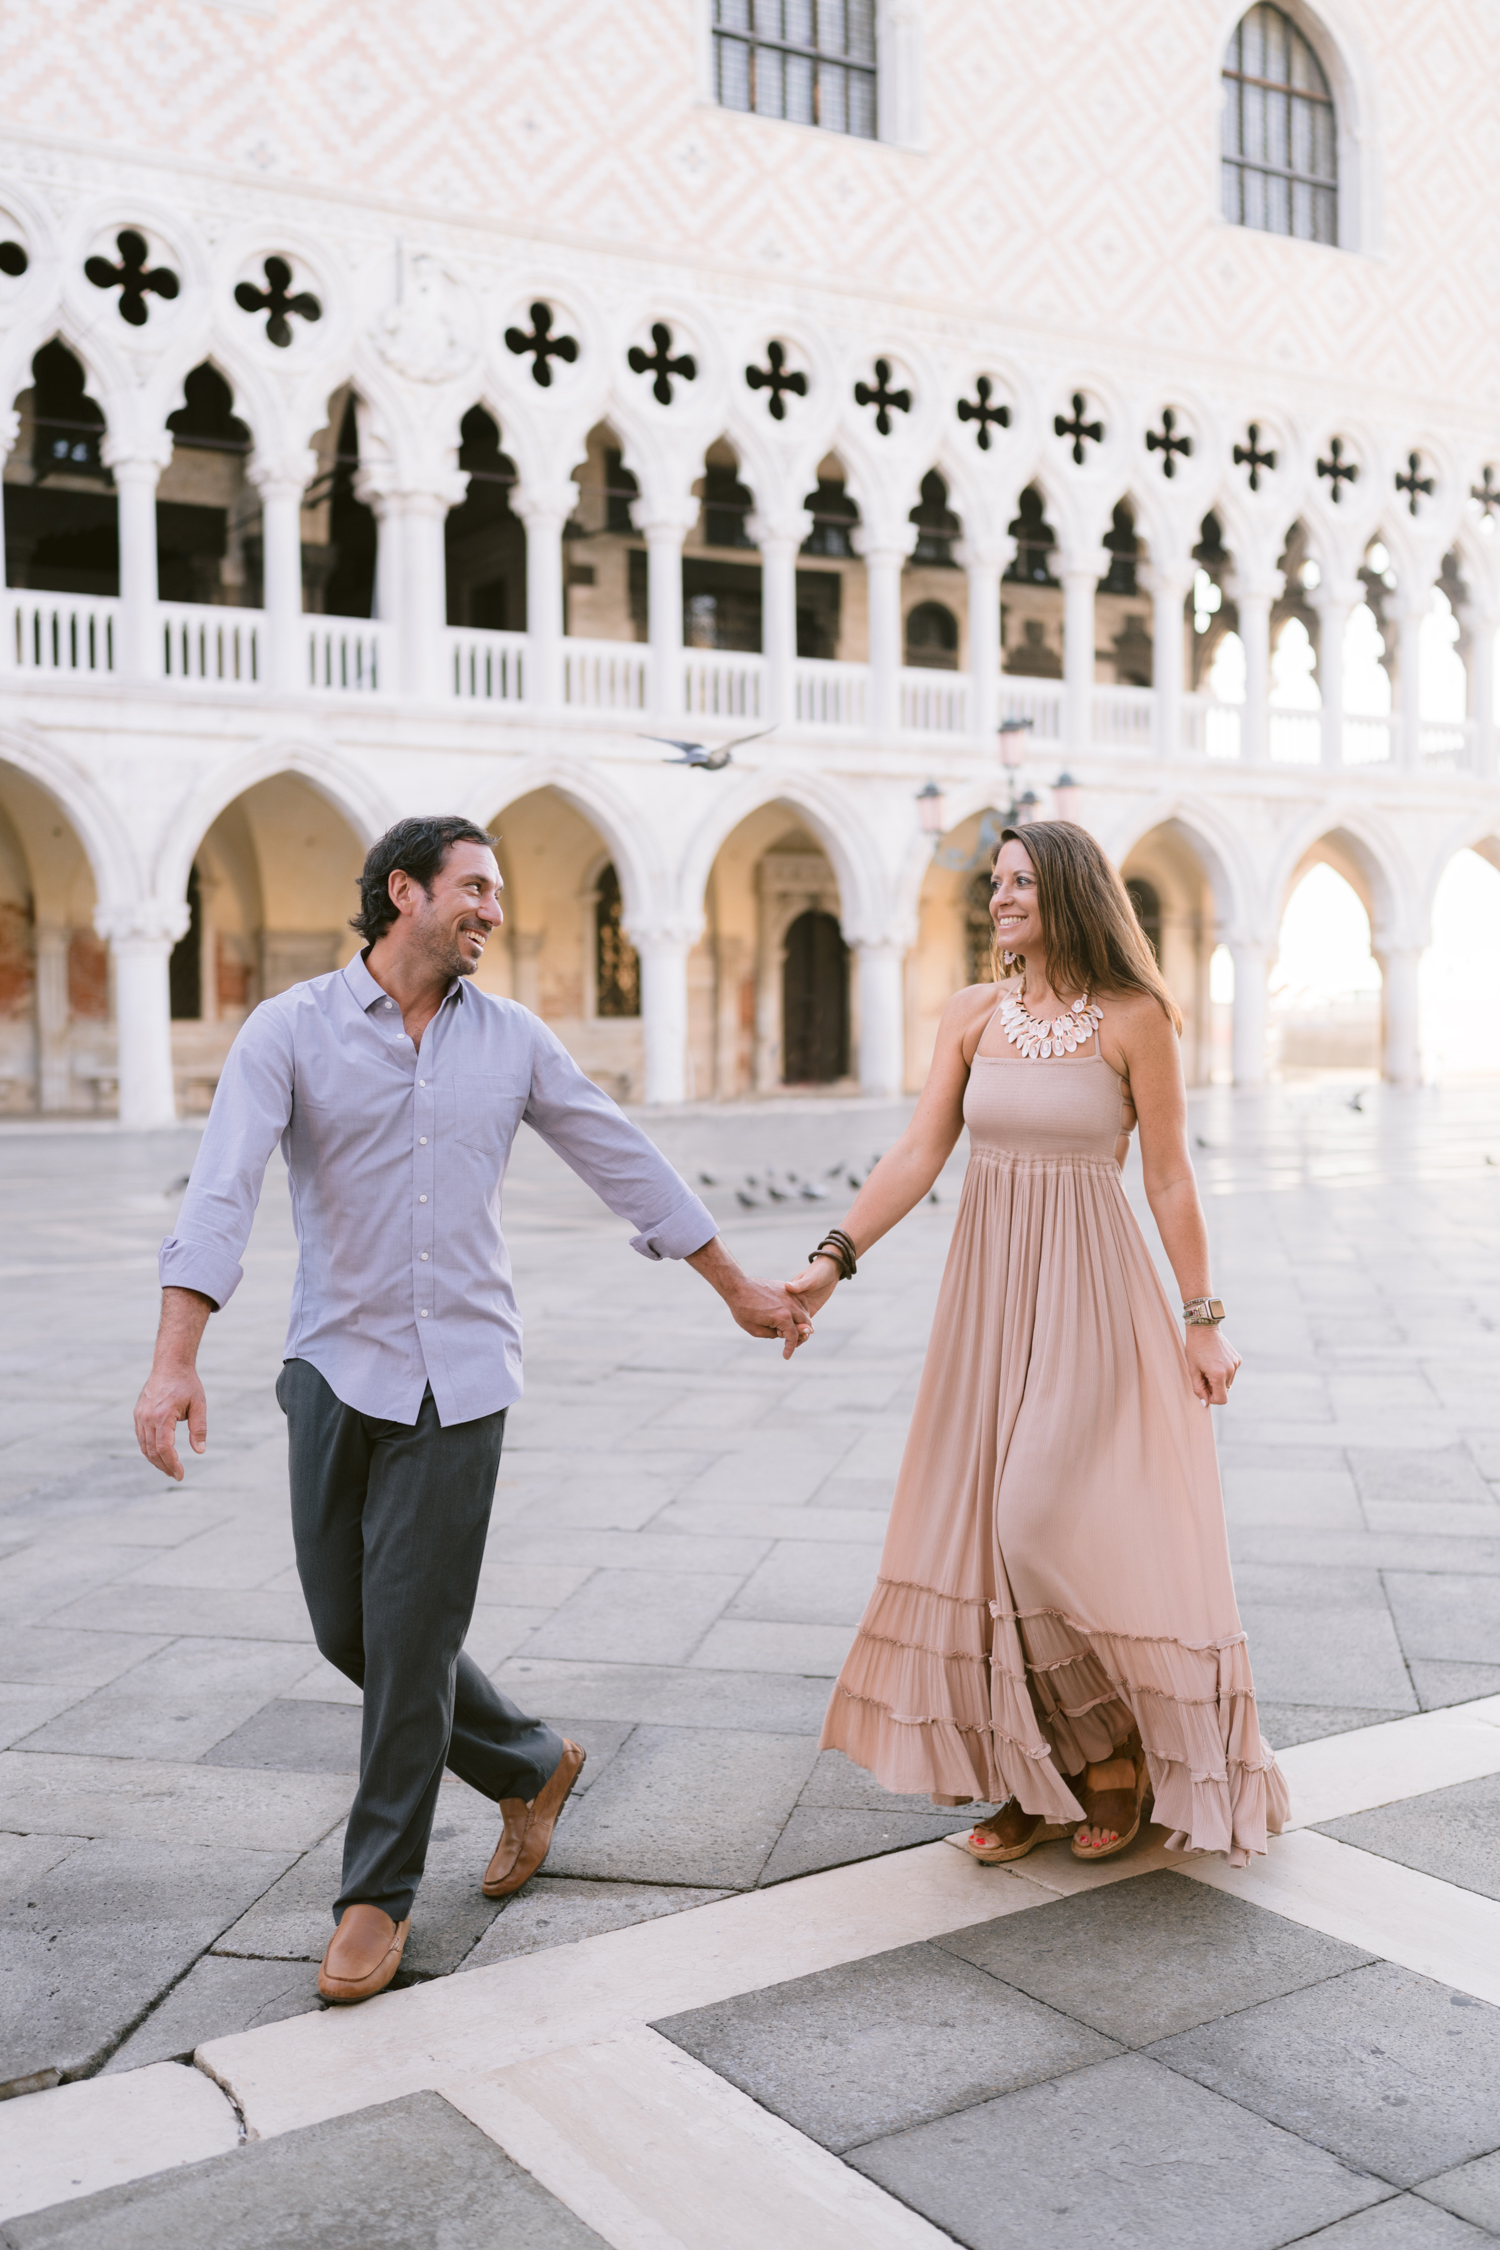 Alina Indi is a wedding, couple, portrait and vacation photographer based in Venice, Italy.